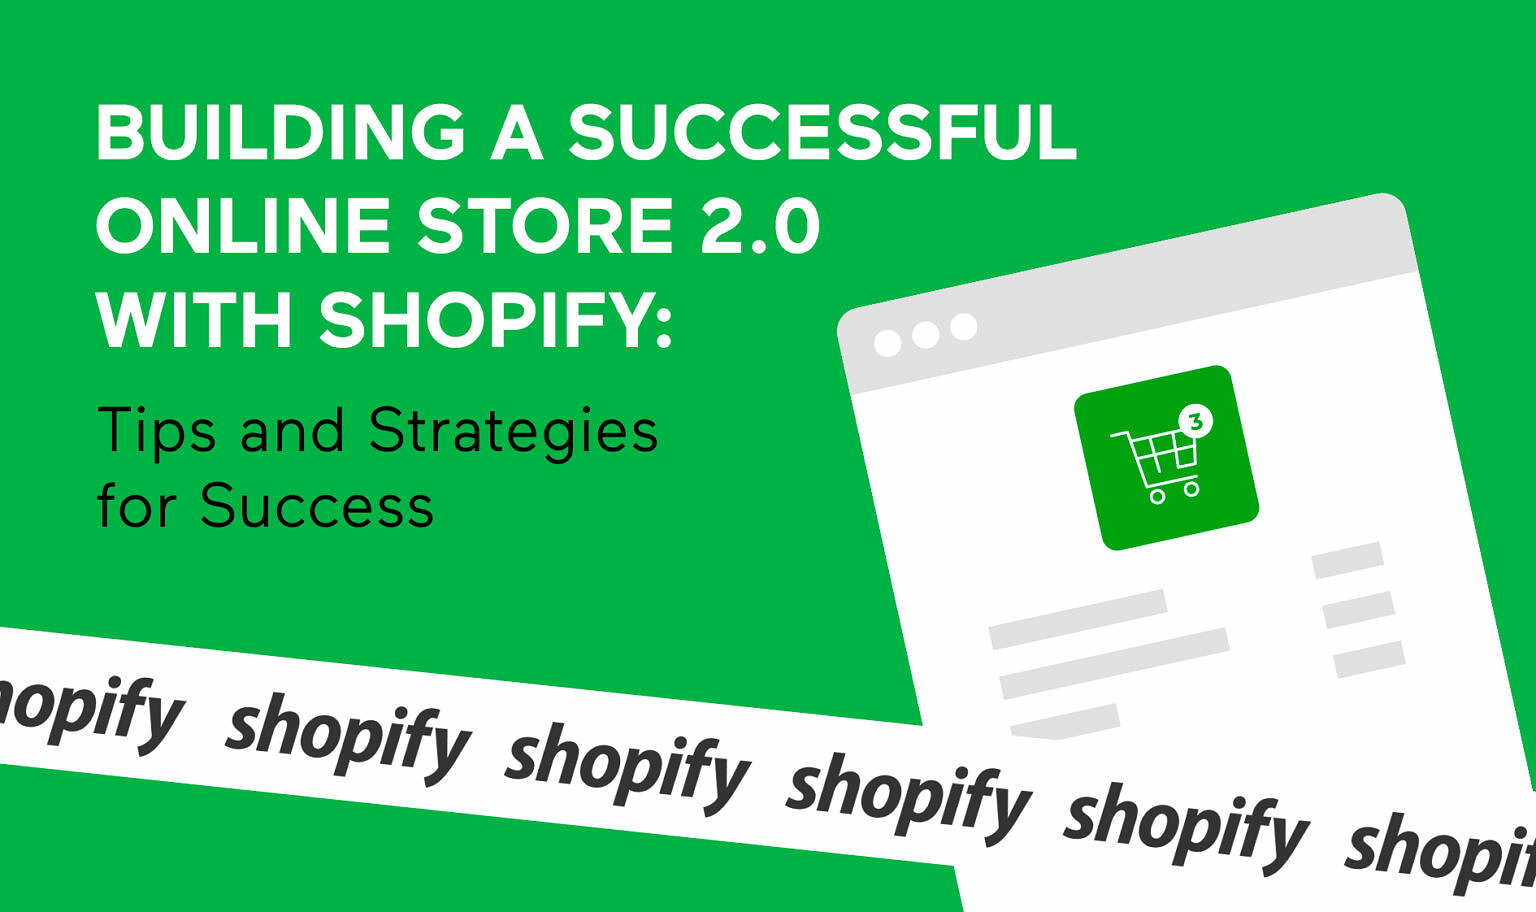 Building a Successful Online Store 2.0 with Shopify